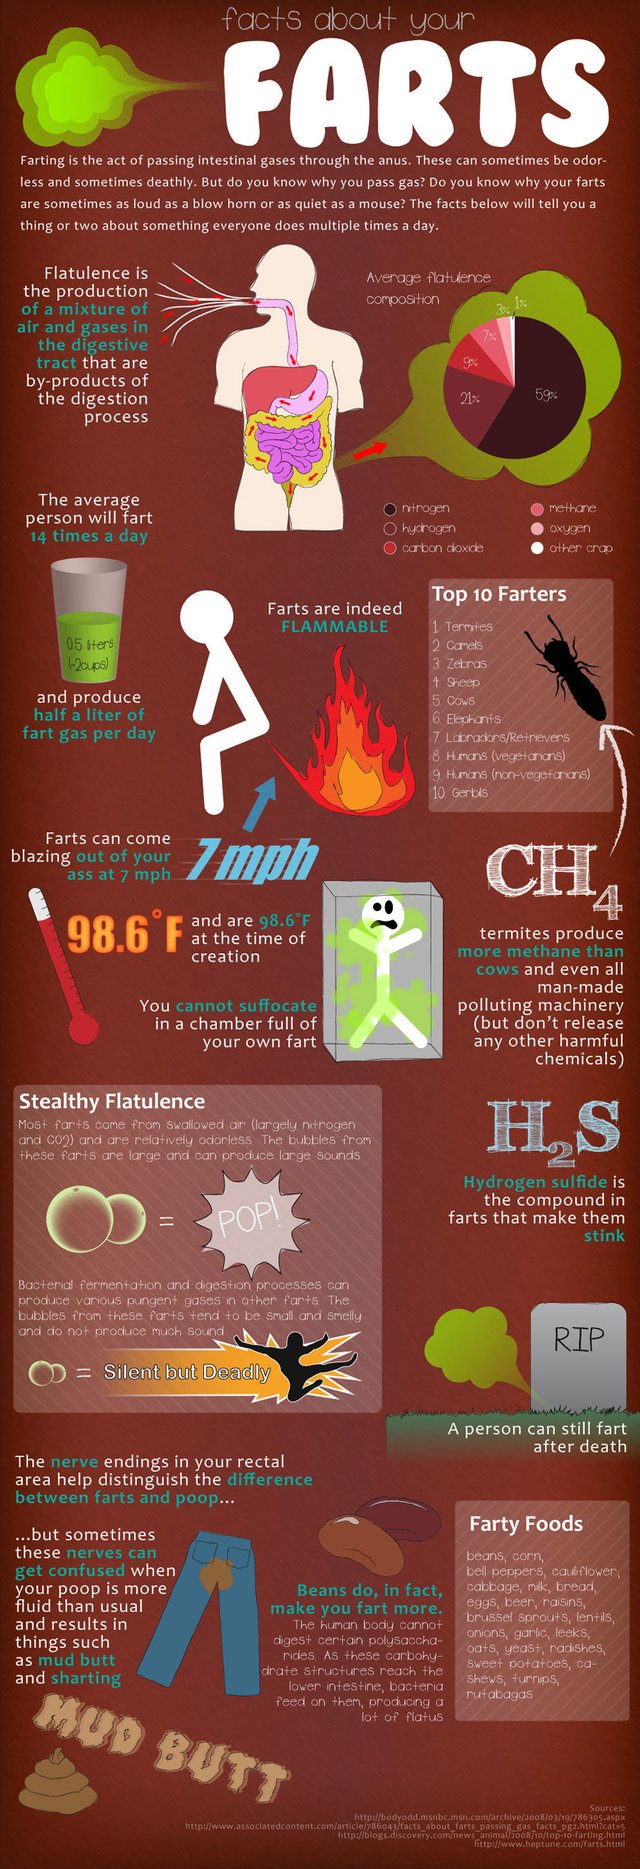 facts_about_farts-s925x2701-38368-1020.jpg